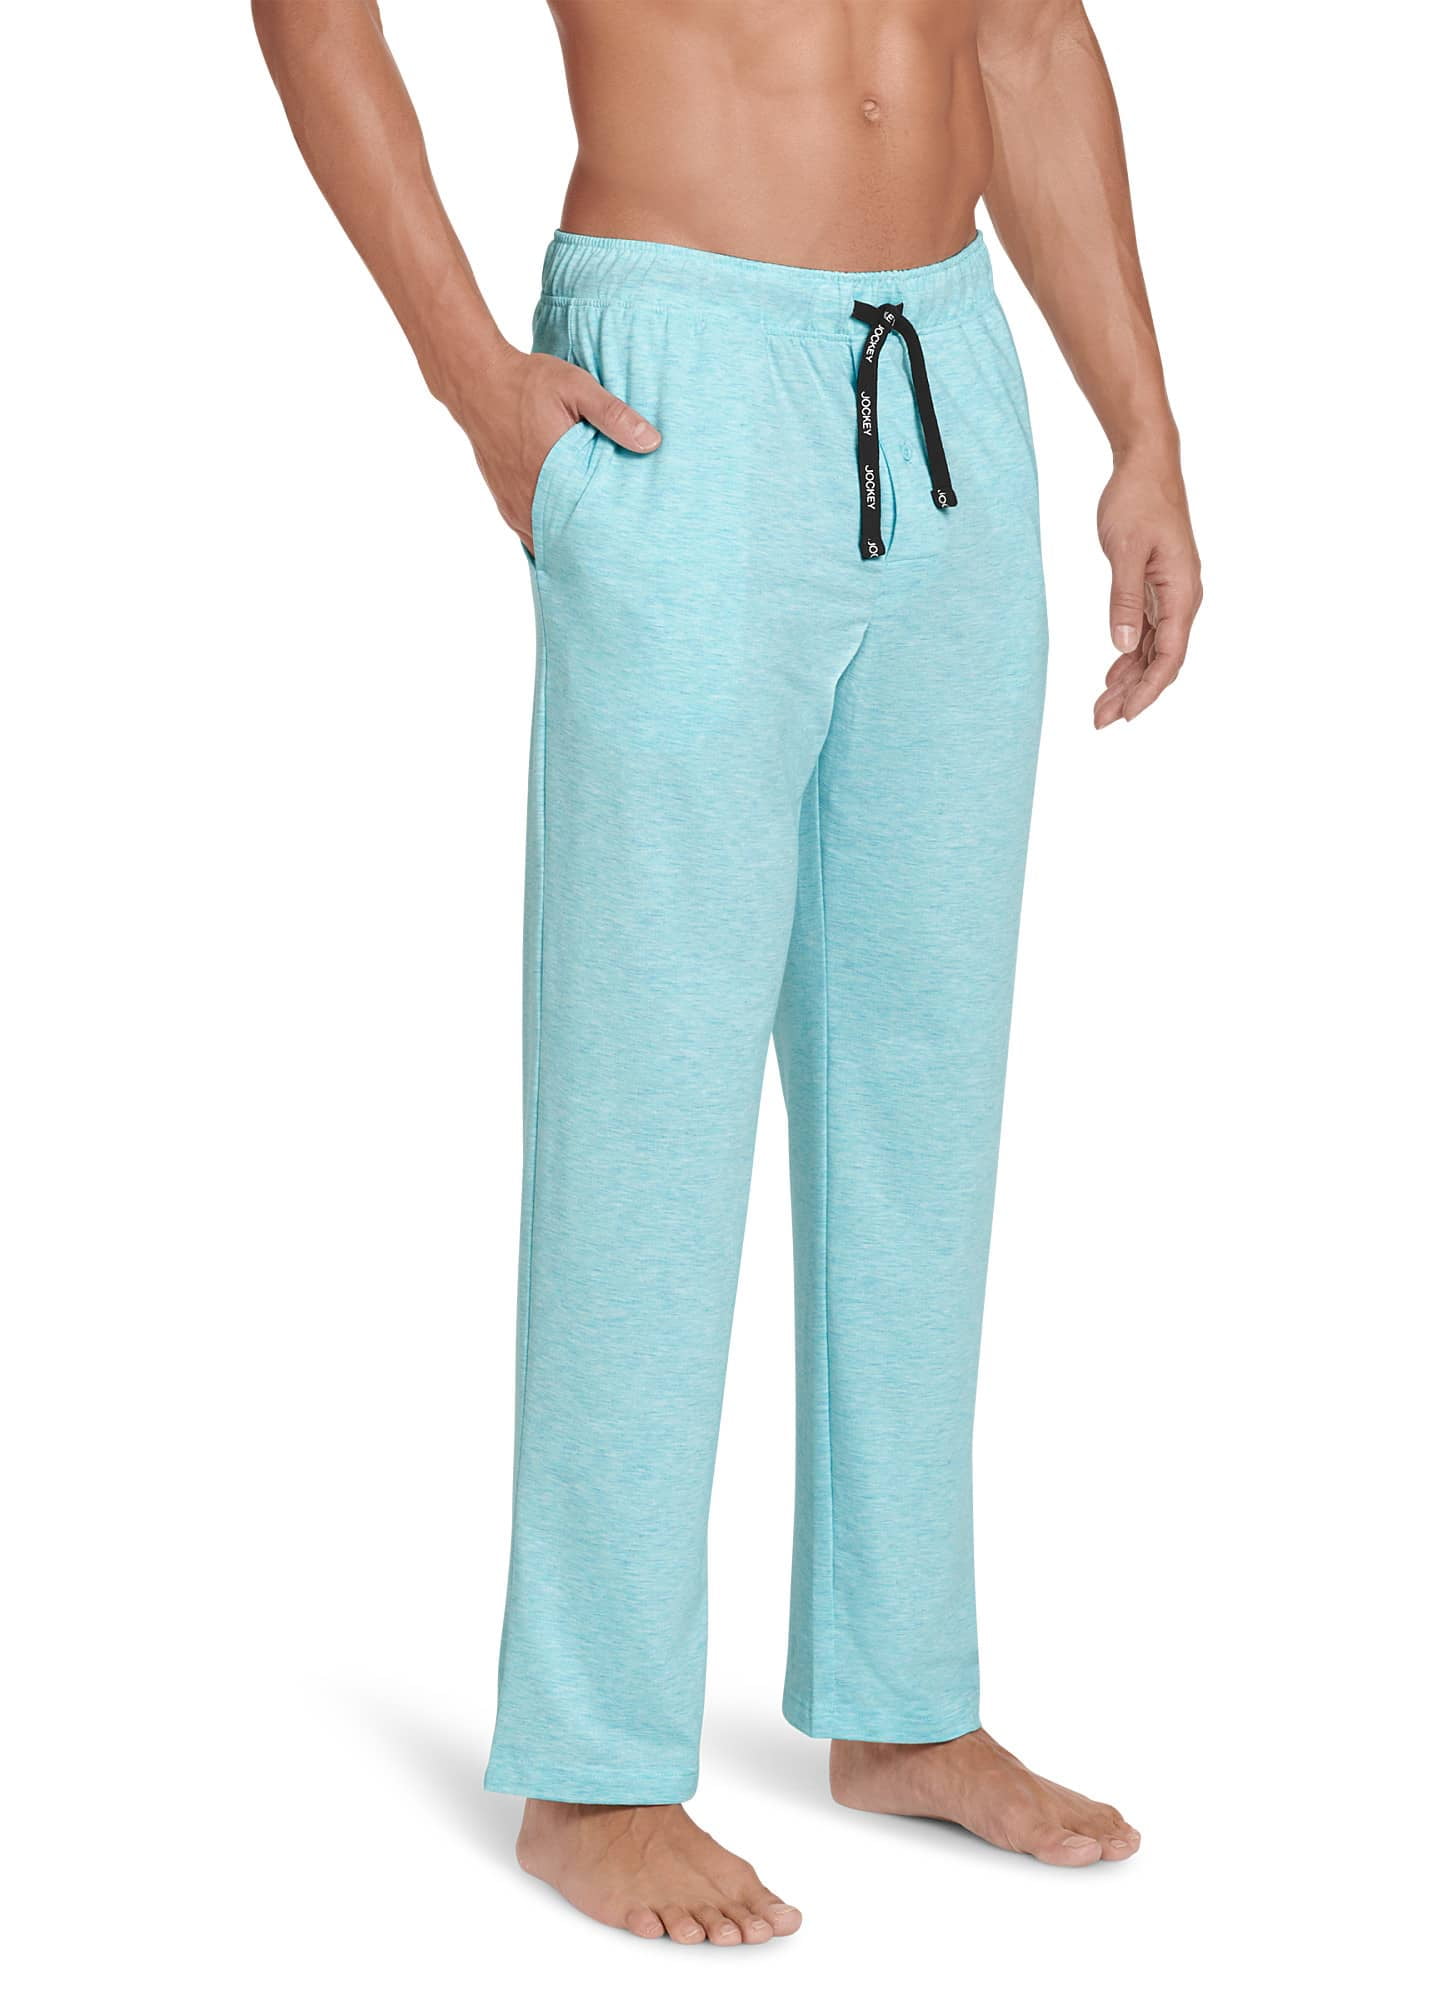 Buy USPA Innerwear Comfort Fit Solid Cotton I690 Lounge Pants - Pack Of 1 -  NNNOW.com